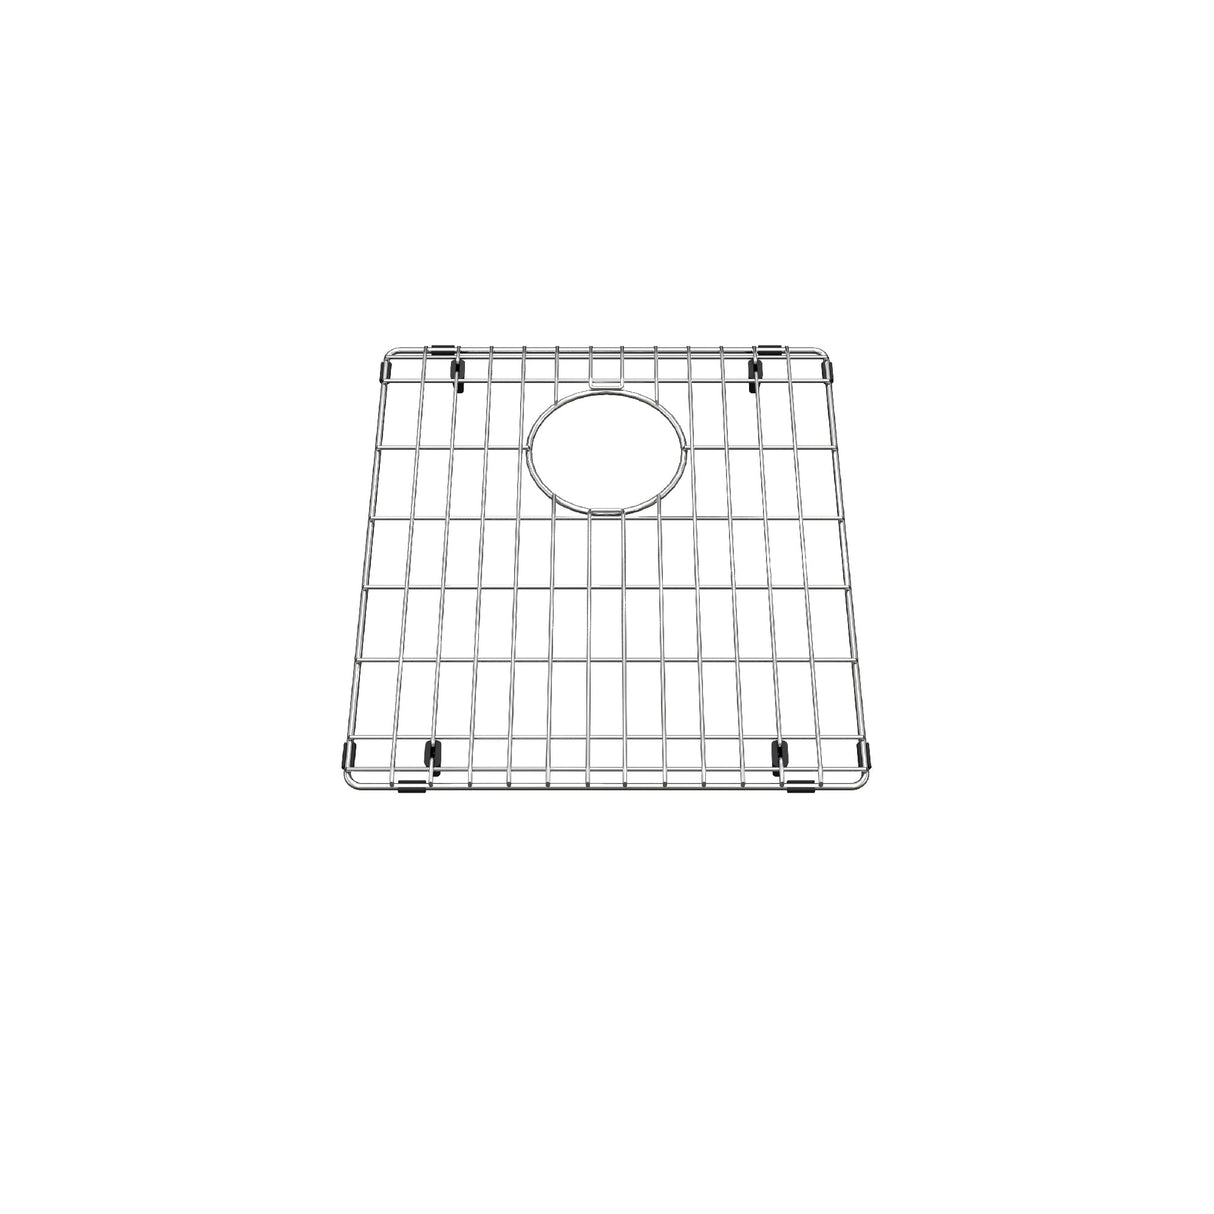 KINDRED BG515S Stainless Steel Bottom Grid for Sink 15-in x 13.5-in In Stainless Steel